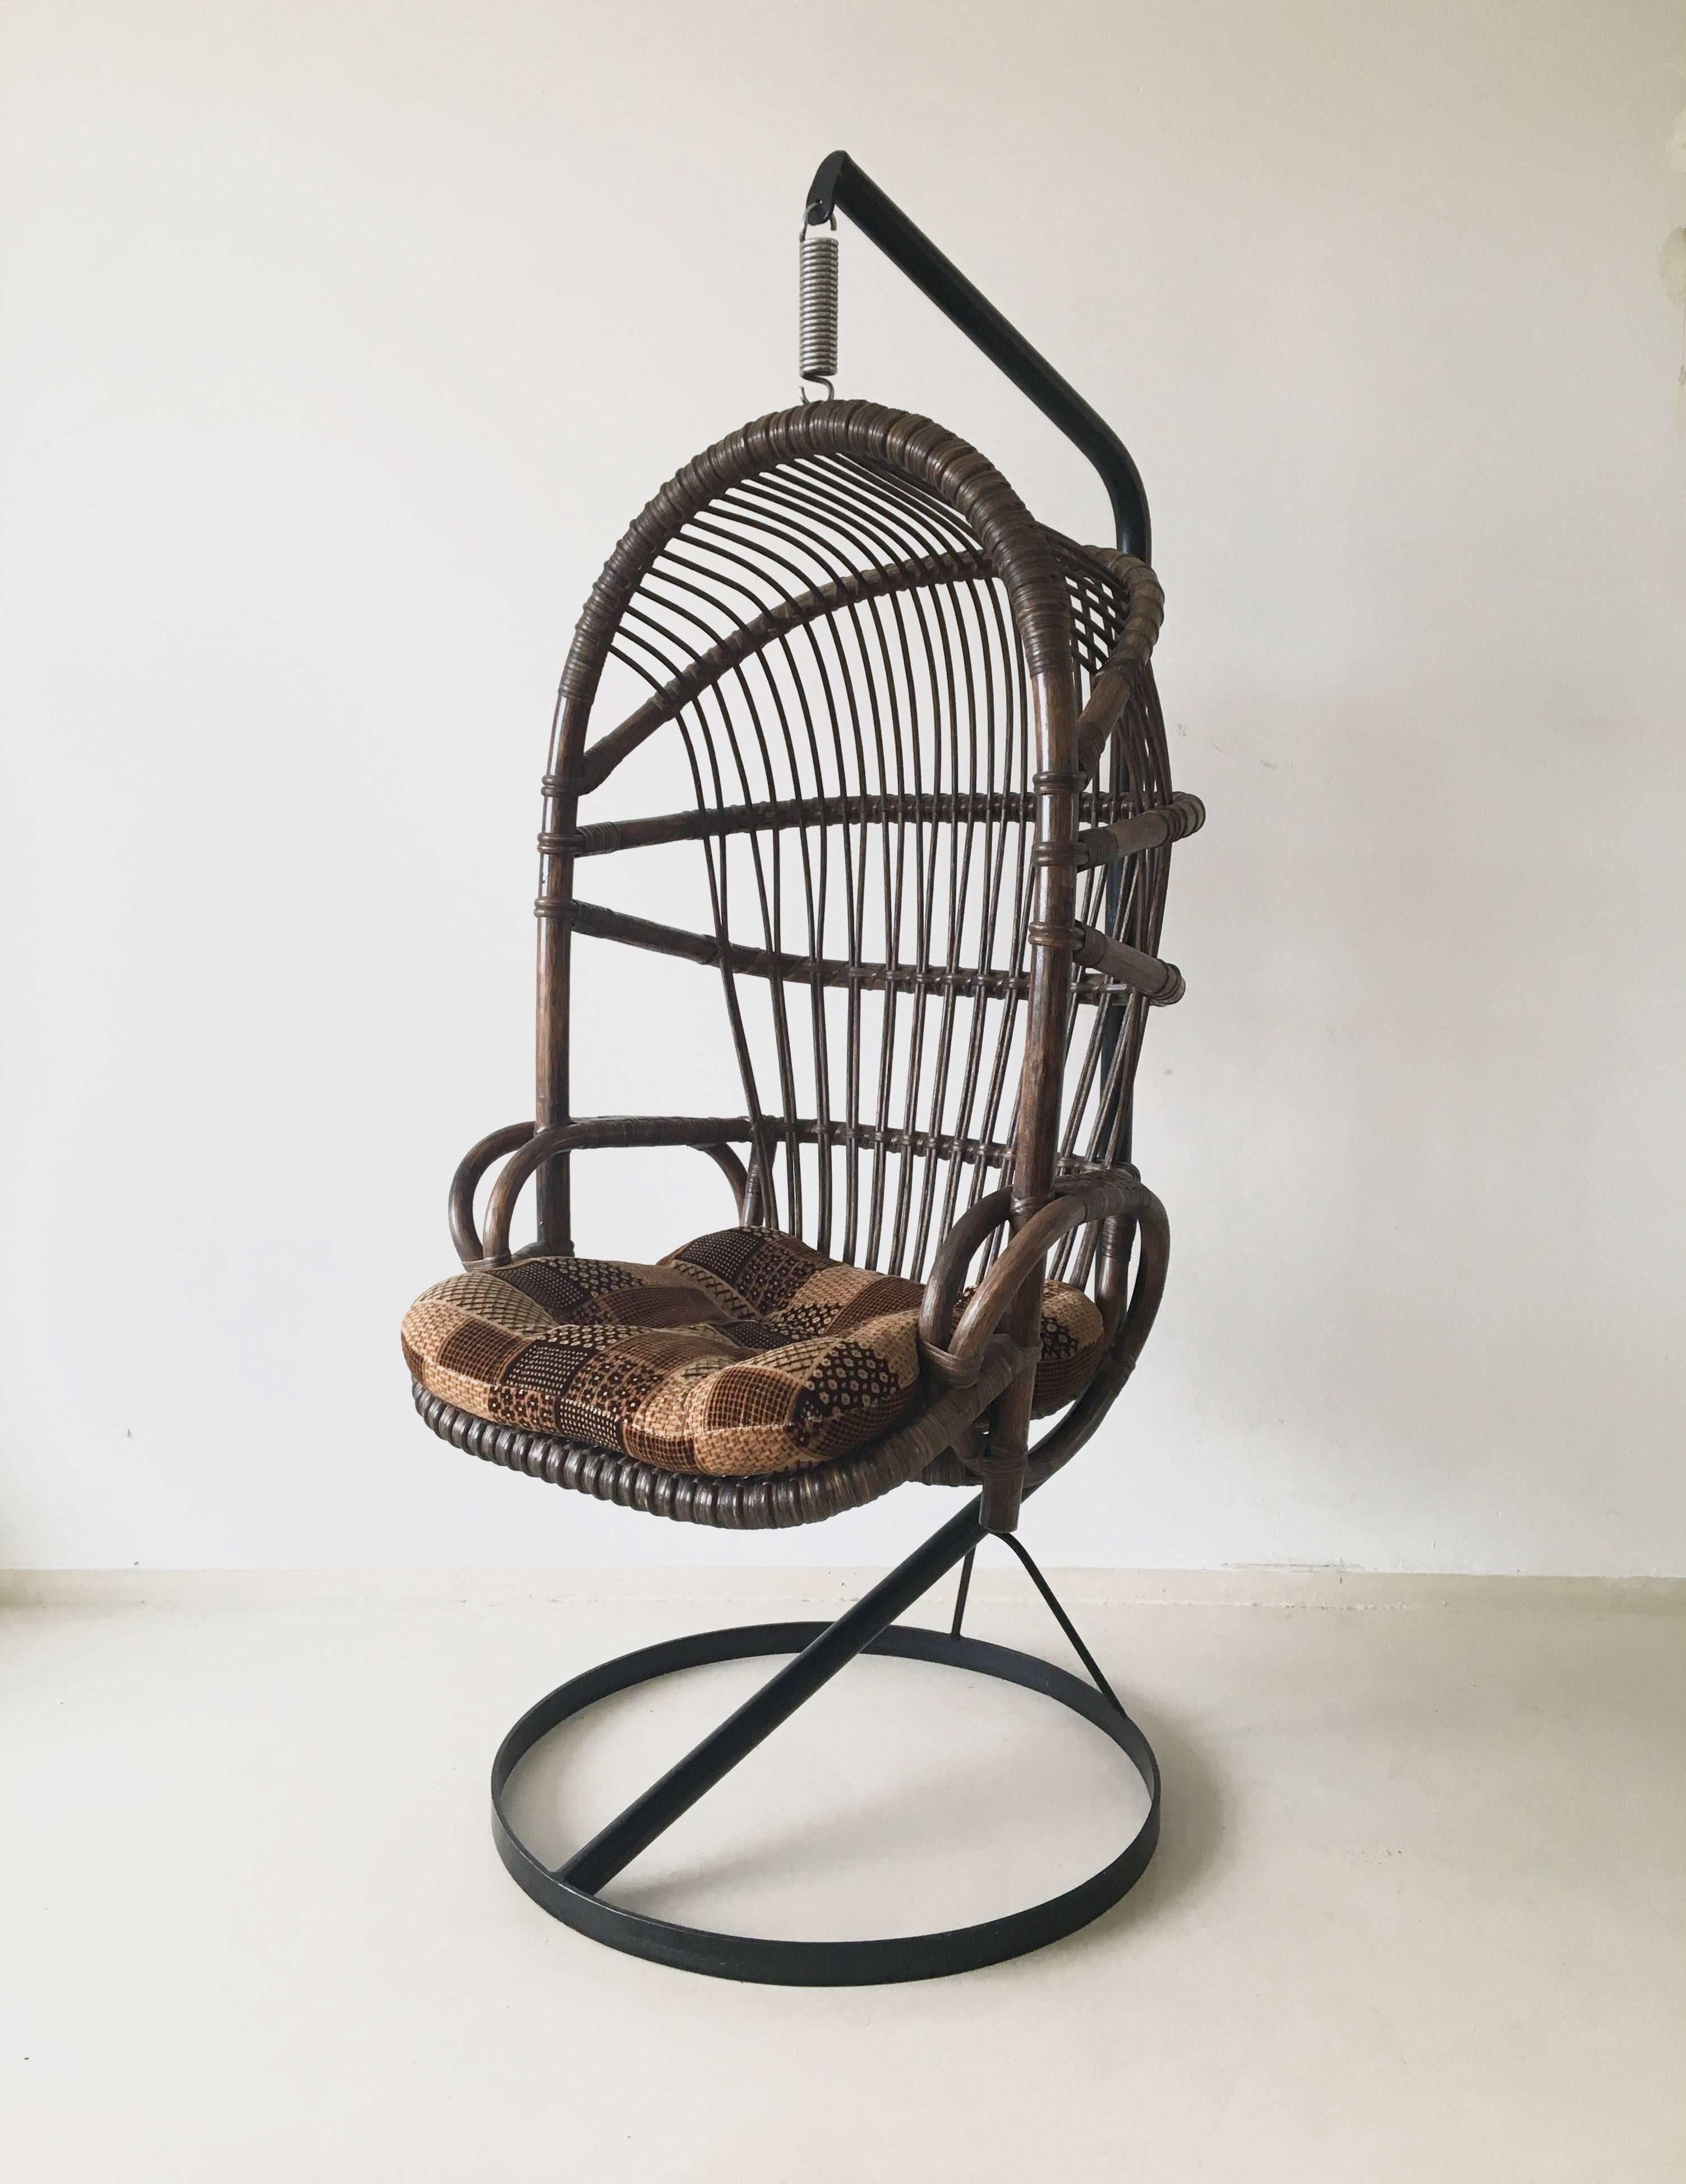 This bamboo and cane hanging chair is a famous 1960s design from The Netherlands. It has a solid metal frame and has it's original color and cushion. It was manufactured by Rohé Noordwolde and remains in a very good vintage condition.